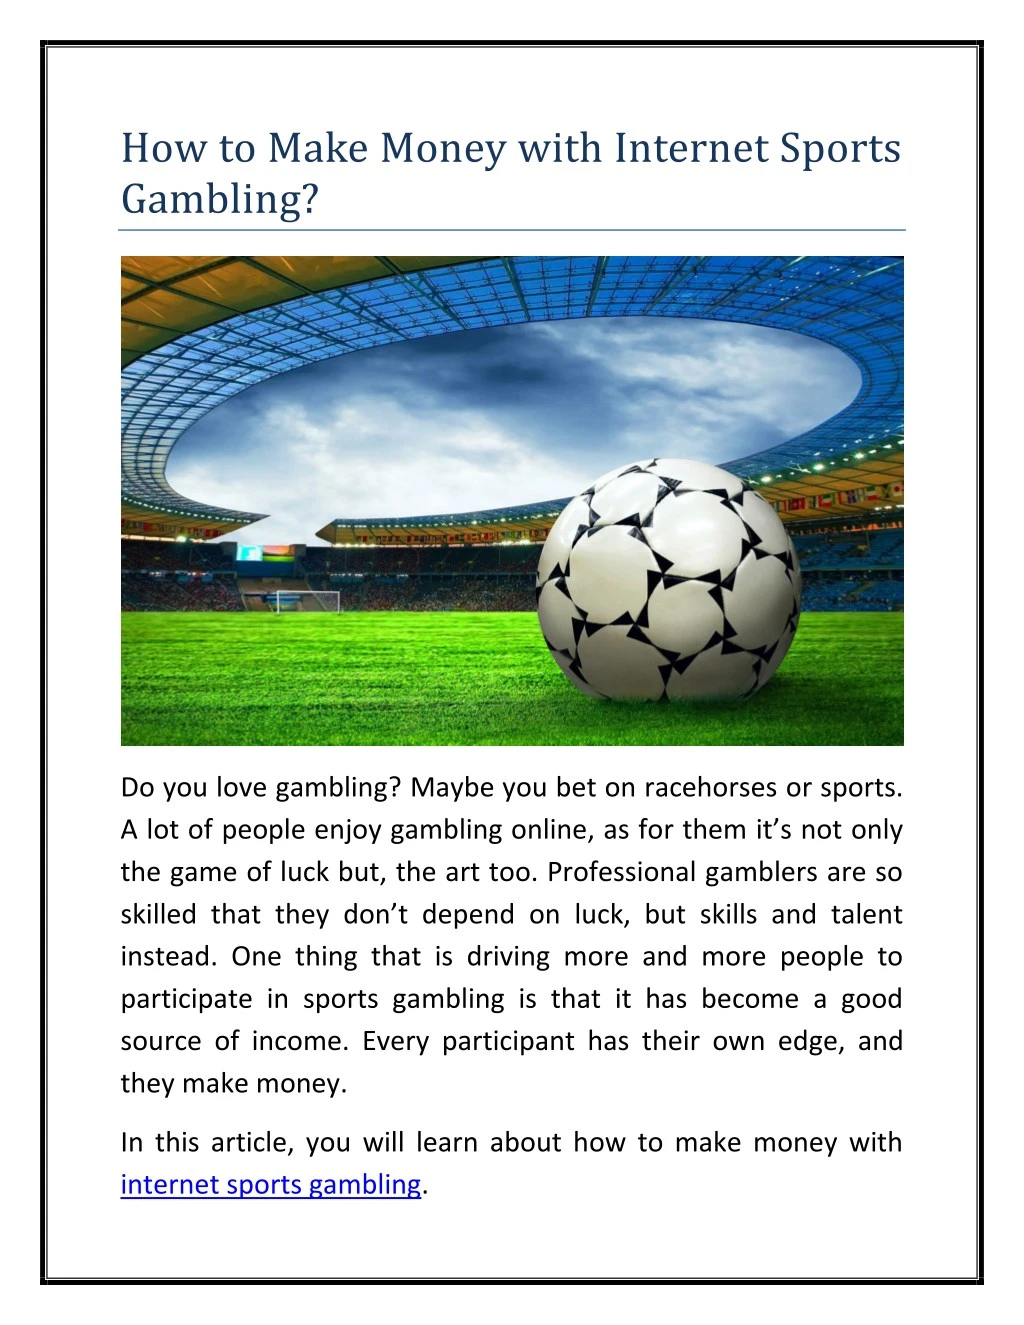 how to make money with internet sports gambling